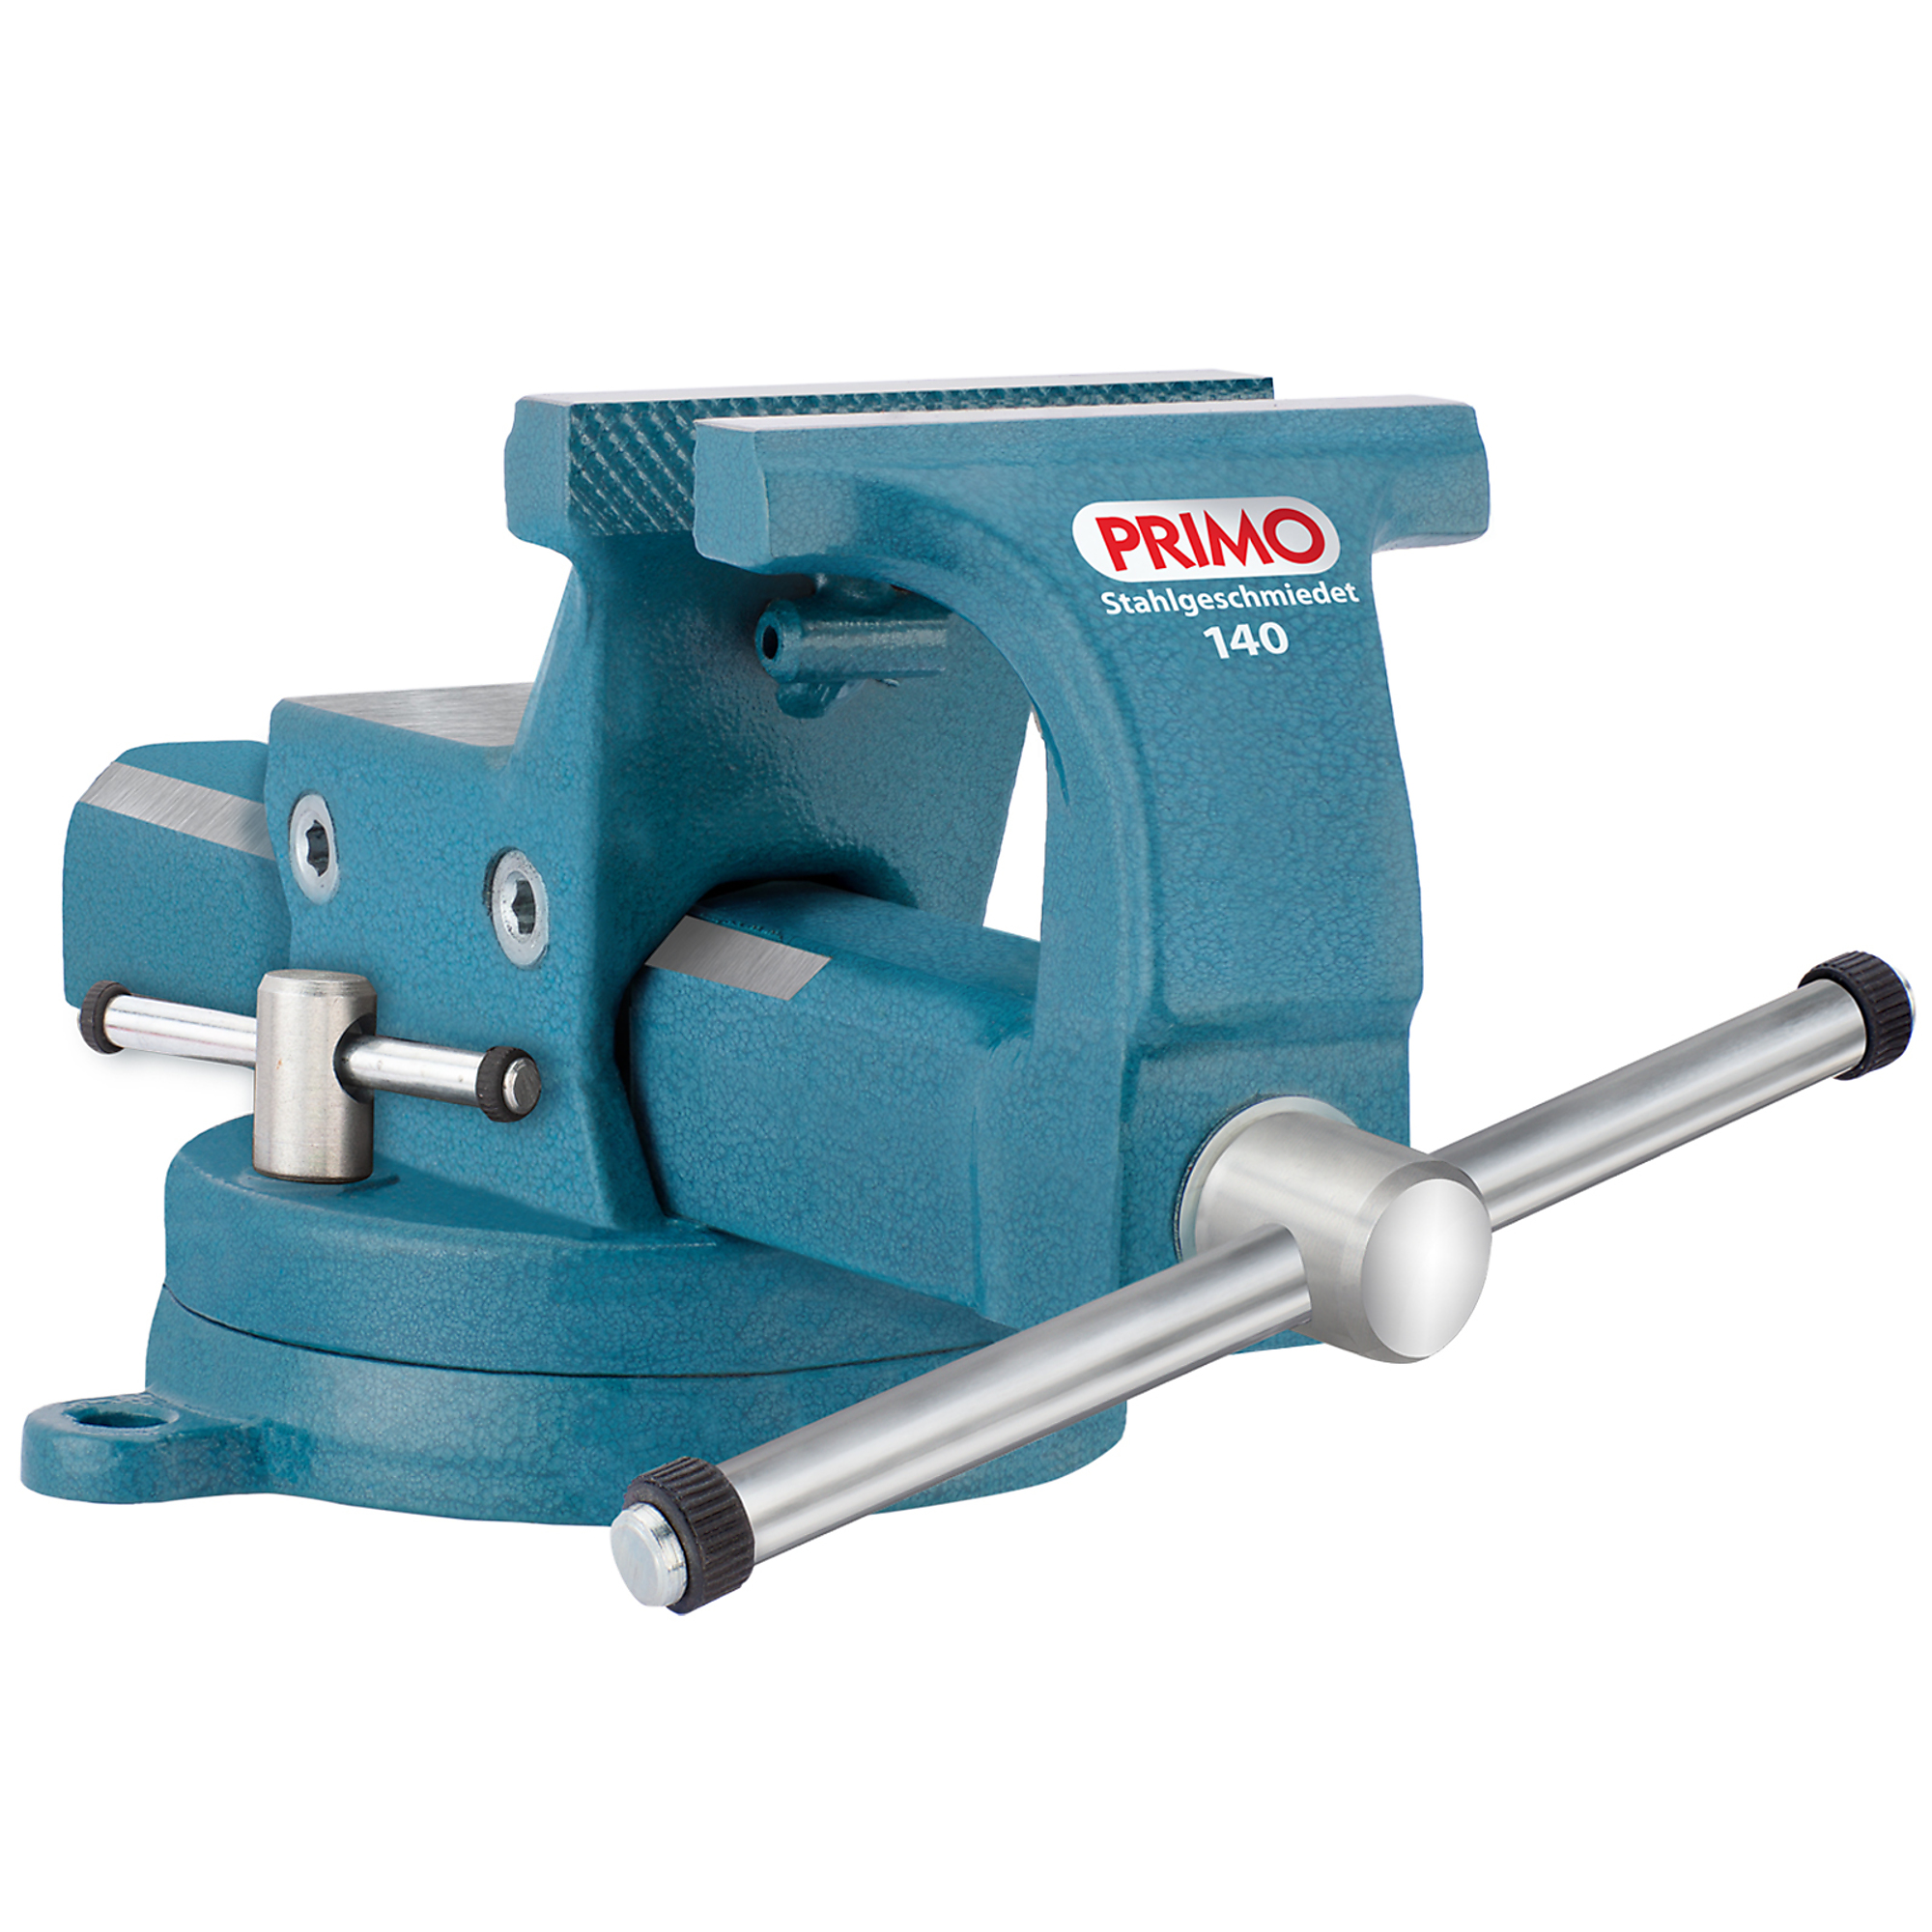 KANCA, PRIMO BENCH VISE w. SWIVEL BASE 160 MM - 6.4Inch, Jaw Width 6.4 in, Jaw Capacity 8.5 in, Model Primo Bench Vise